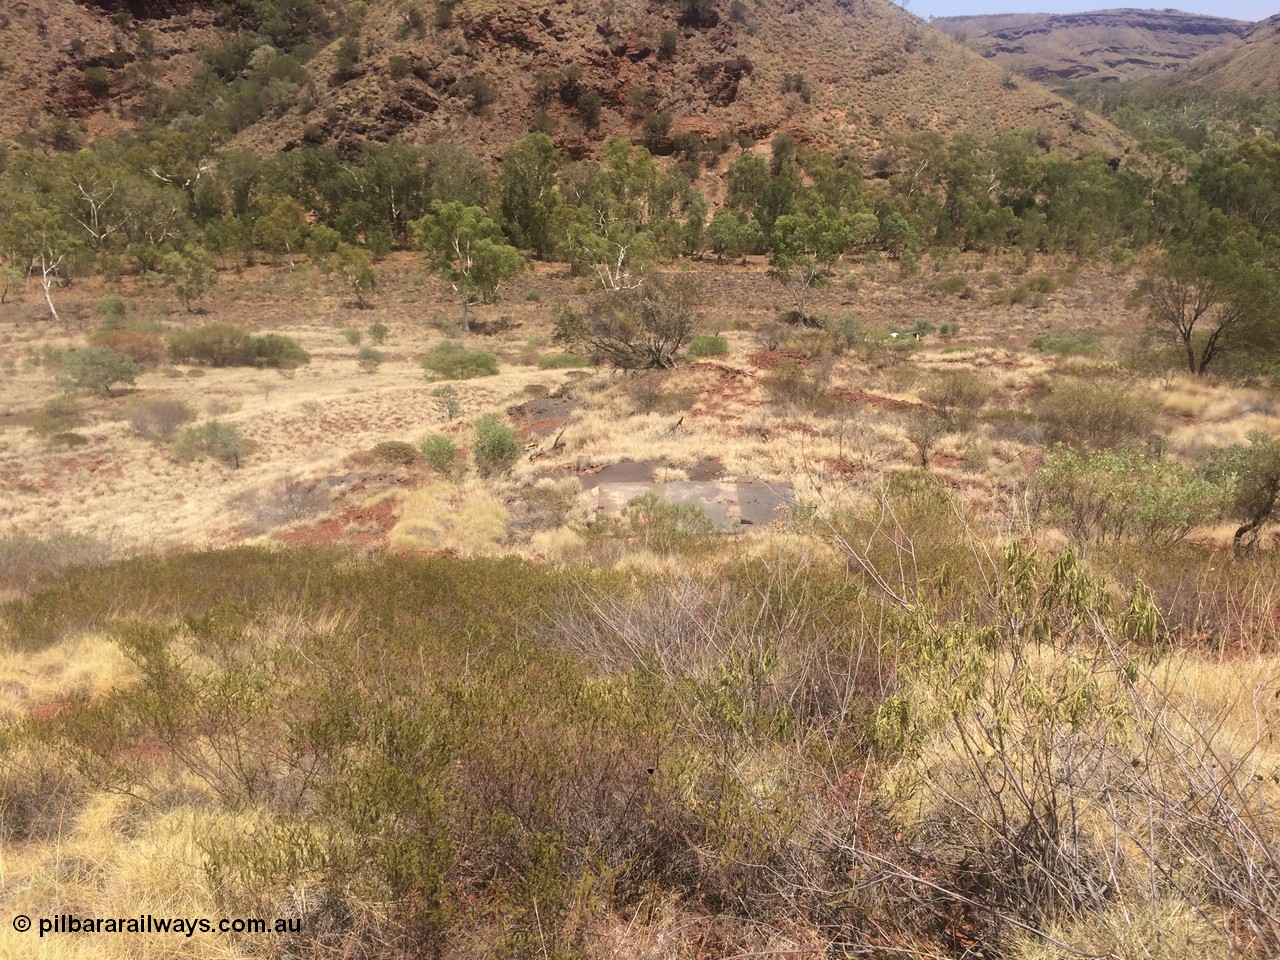 160101 2296
Wittenoom Gorge, location of former power station, showing old foundations, looking north from approx. engine hall location, geodata: [url=https://goo.gl/maps/57KCdj76x442] -22.3222833 118.3340833 [/url], iPhone 5S image.
